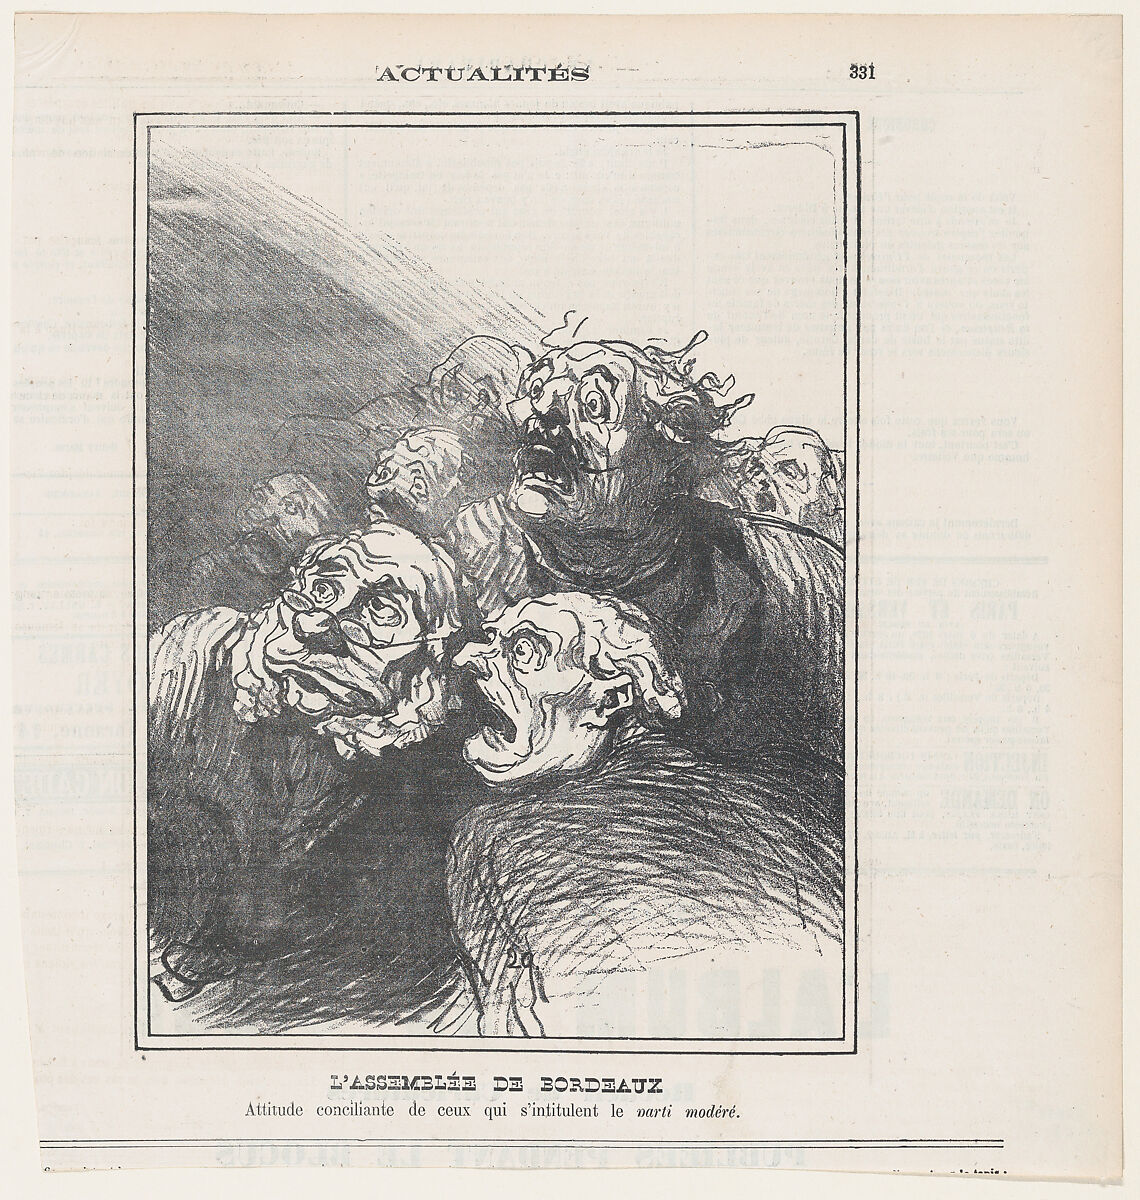 The Bordeaux Assembly: View of the conciliatory attitude of the 'moderate party', from "News of the day", Honoré Daumier (French, Marseilles 1808–1879 Valmondois), Lithograph on newsprint; second state of two (Delteil) 